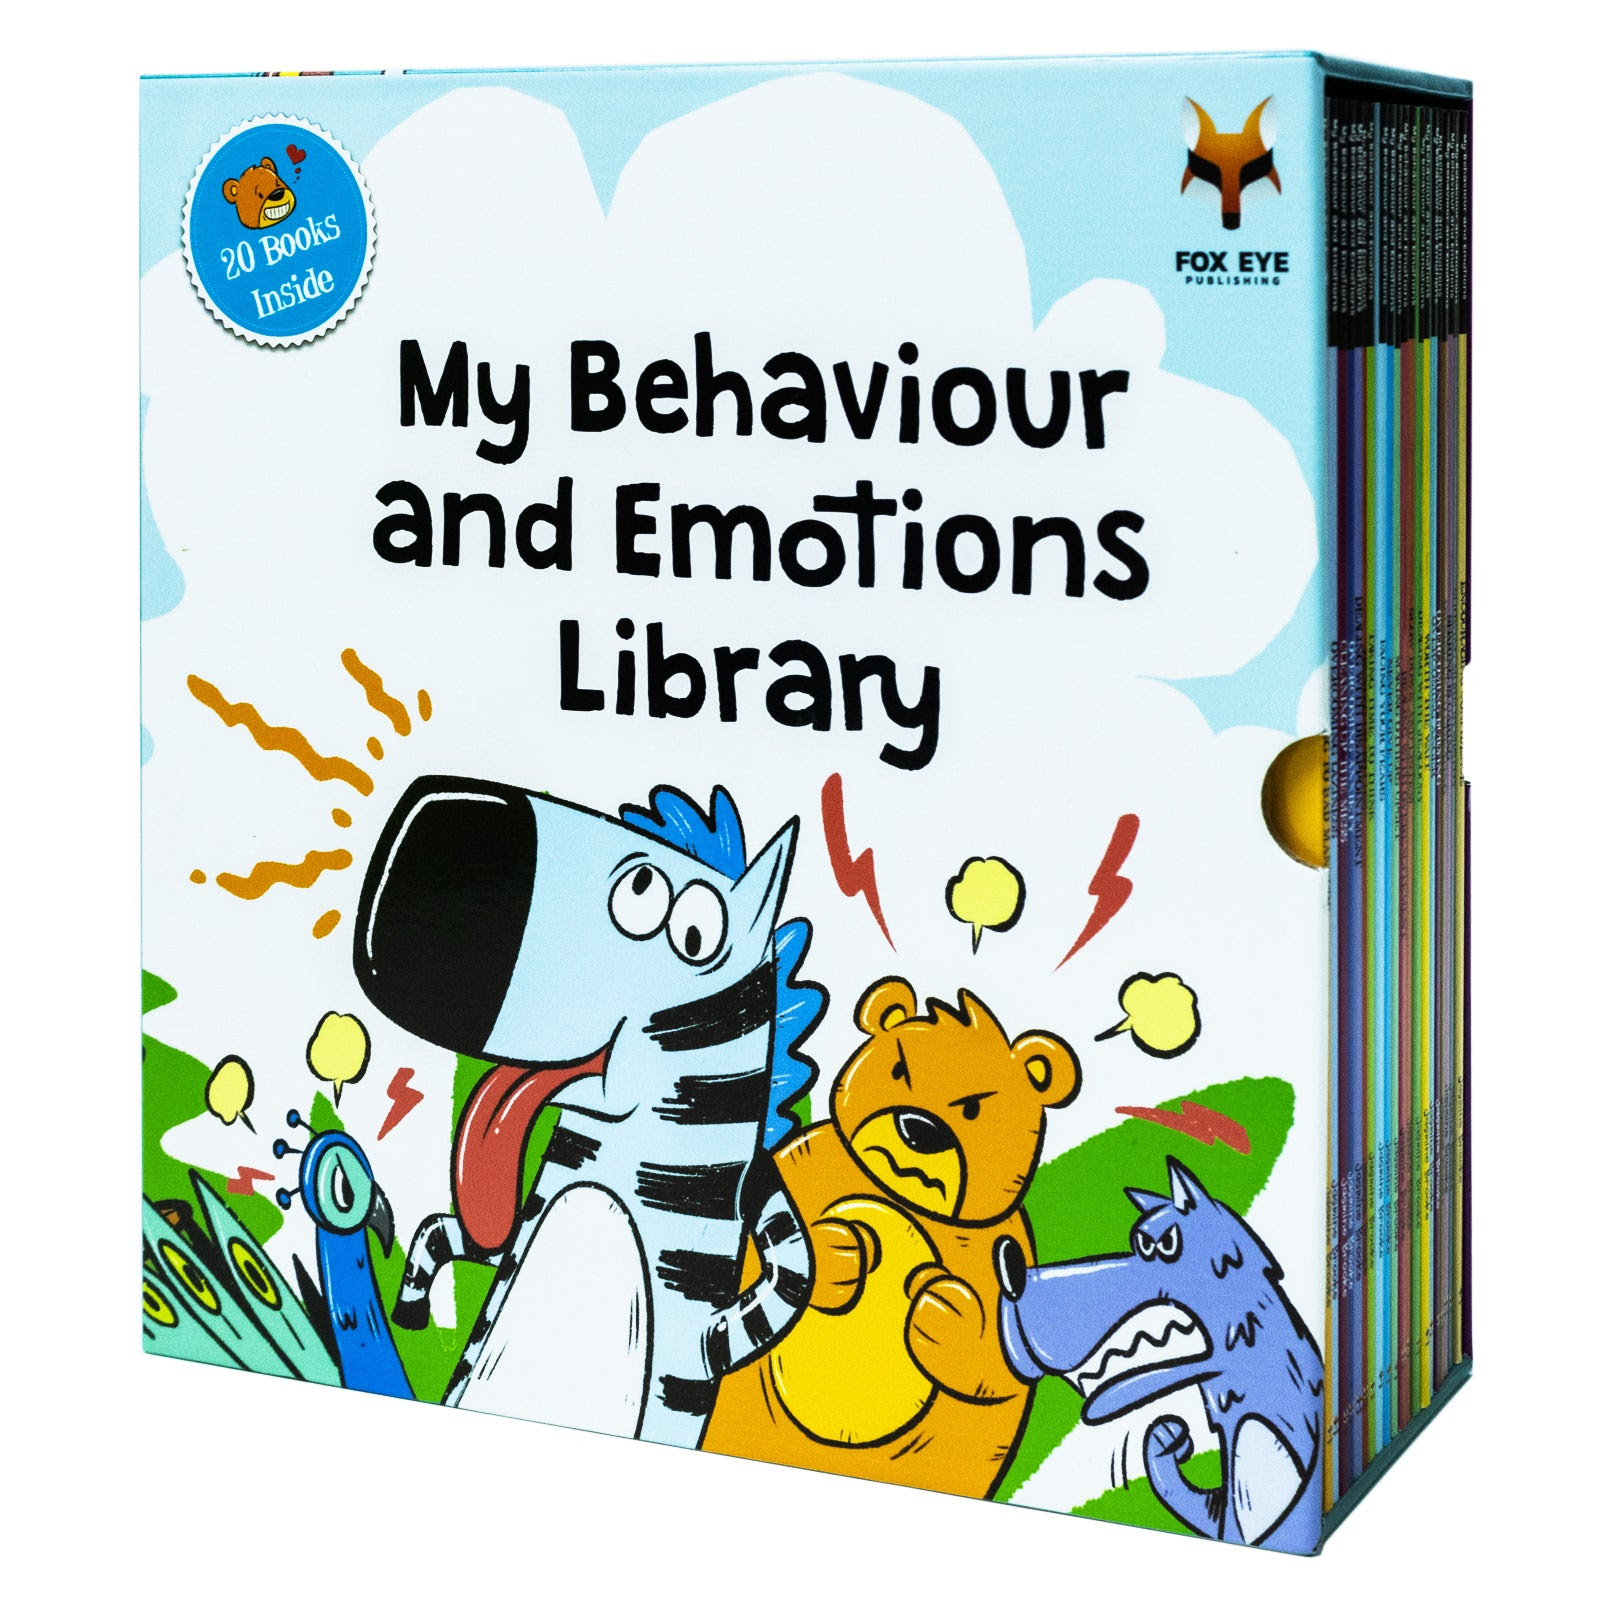 Image of My Behaviour and Emotions Library 20 Books Box Set: Anxiety, Confidence, Bullying, Sympathy, Lying, Jealousy, Anger, Patience, Sharing, Bad Manners, Kindness